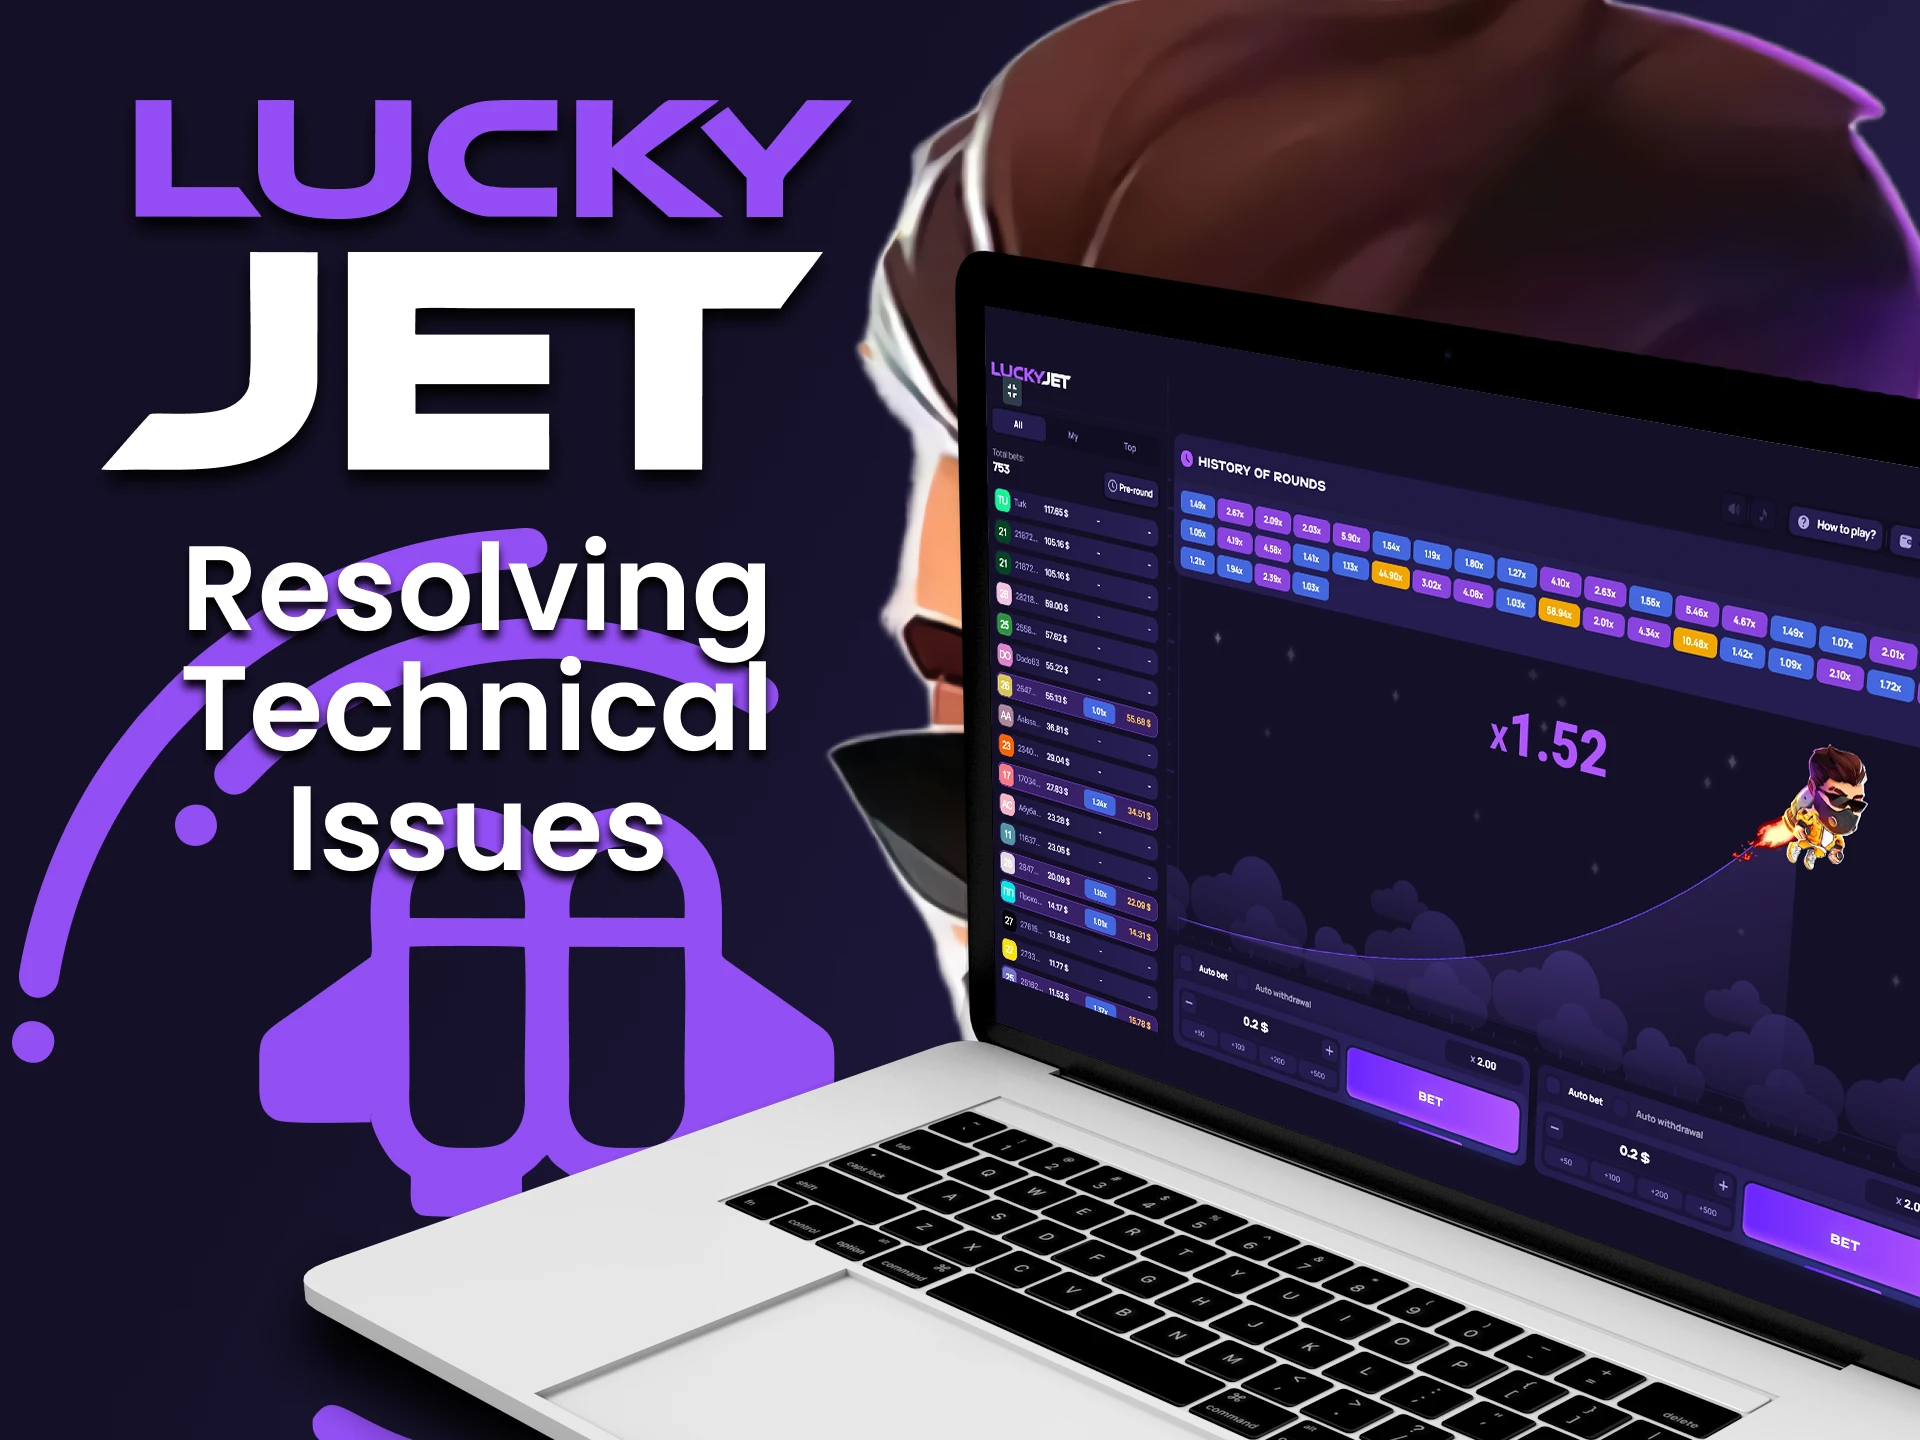 The Lucky Jet team is trying to keep the game from getting into trouble.